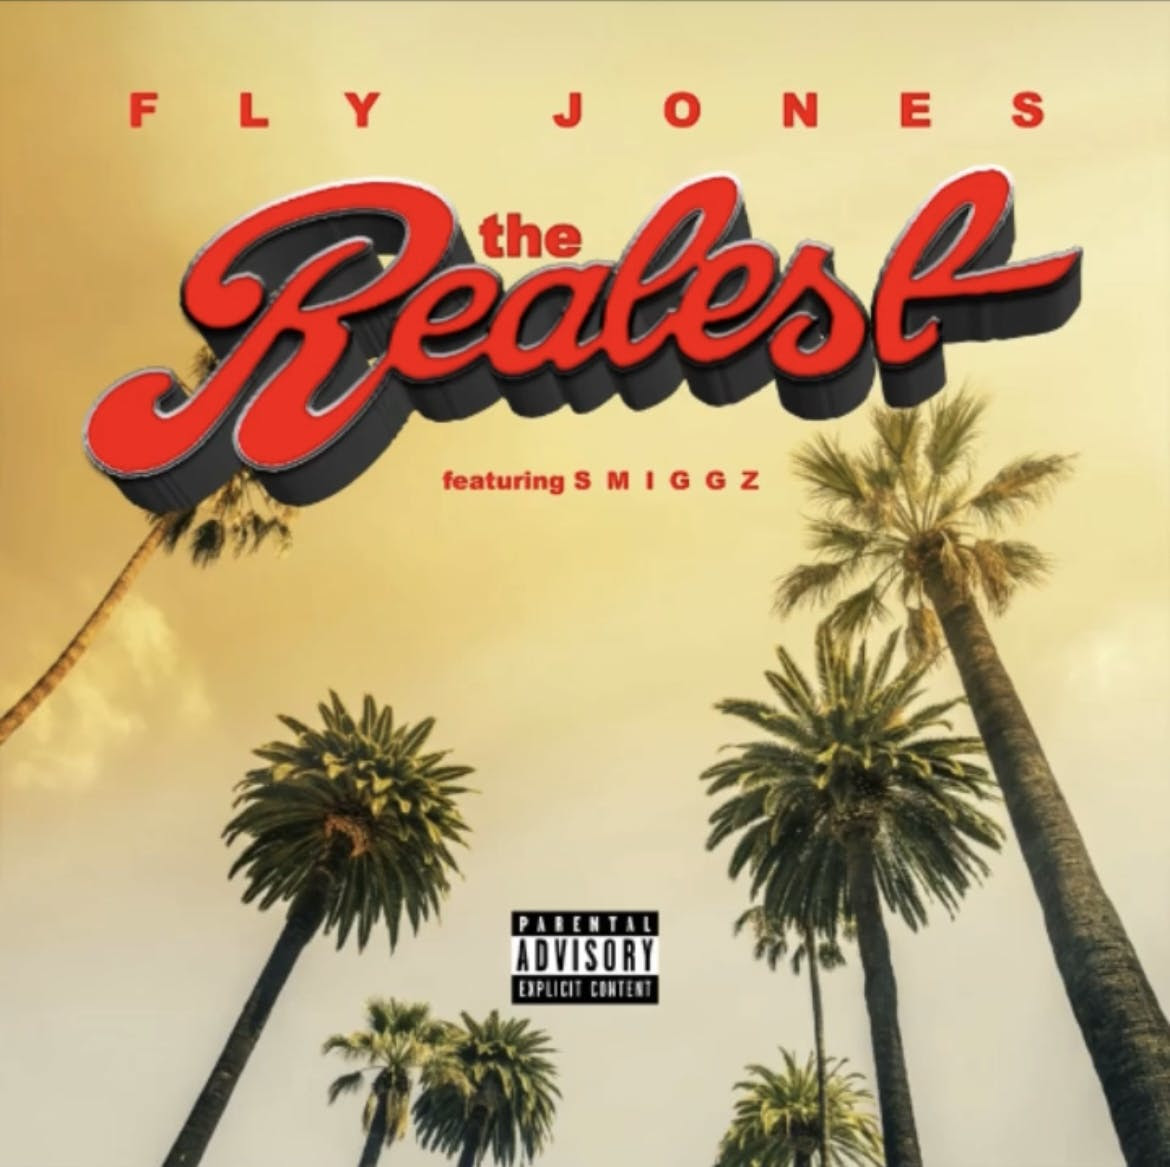 Fly Jones is Back With New Single “The Realest”